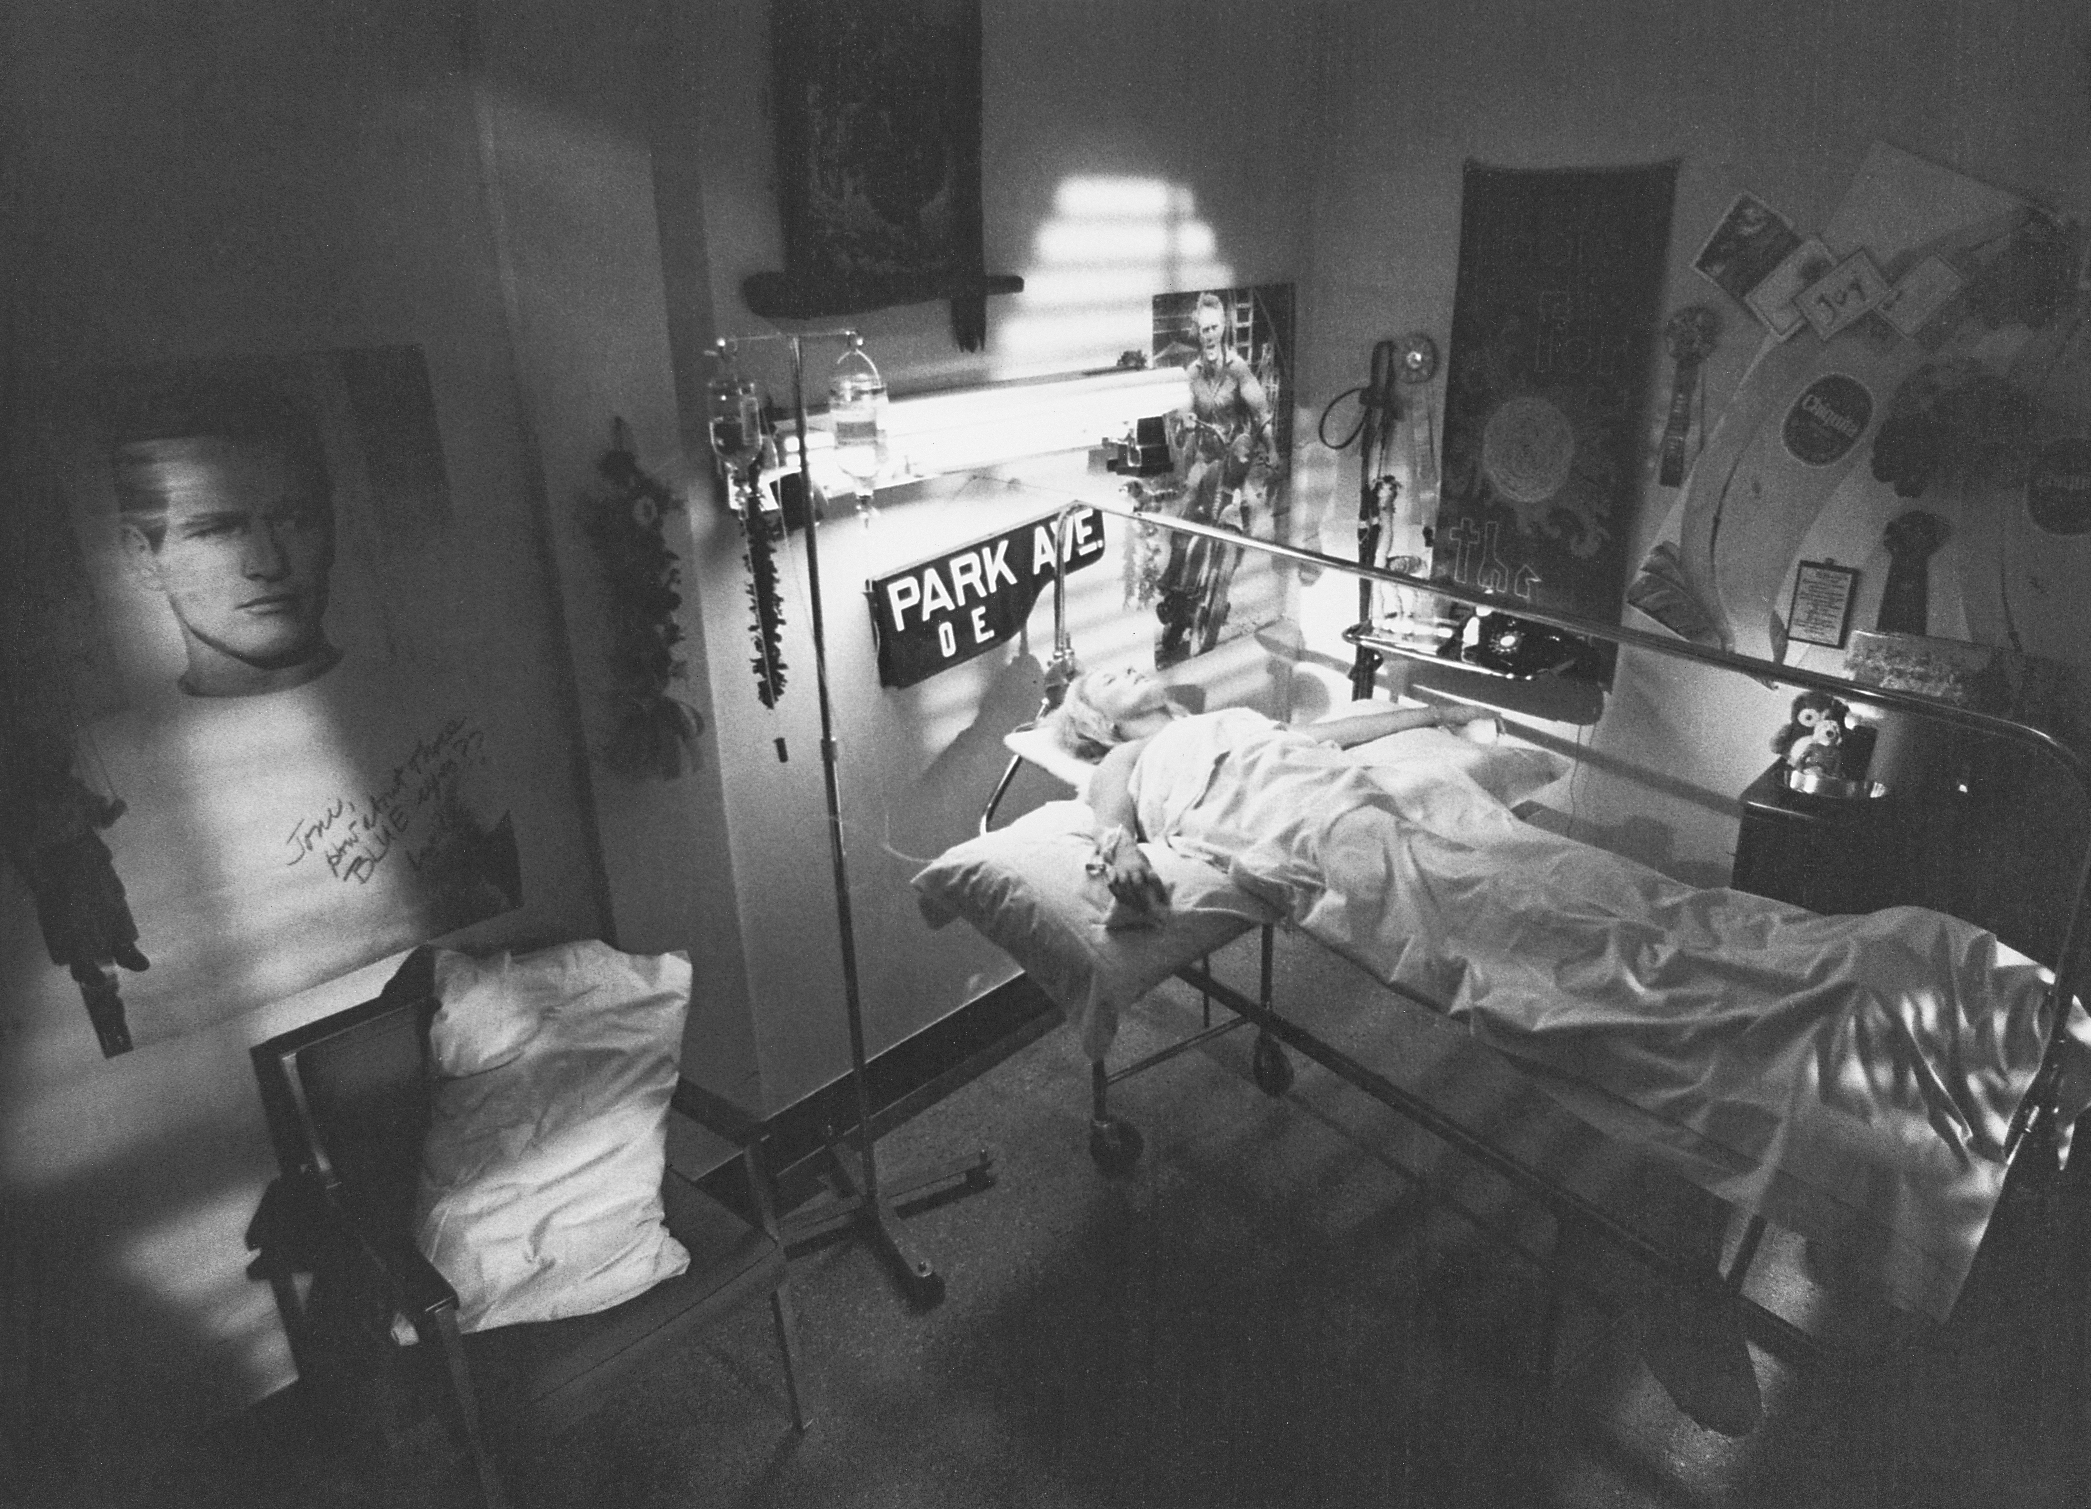 A picture of Joni in her hospital bed when she was first injured.